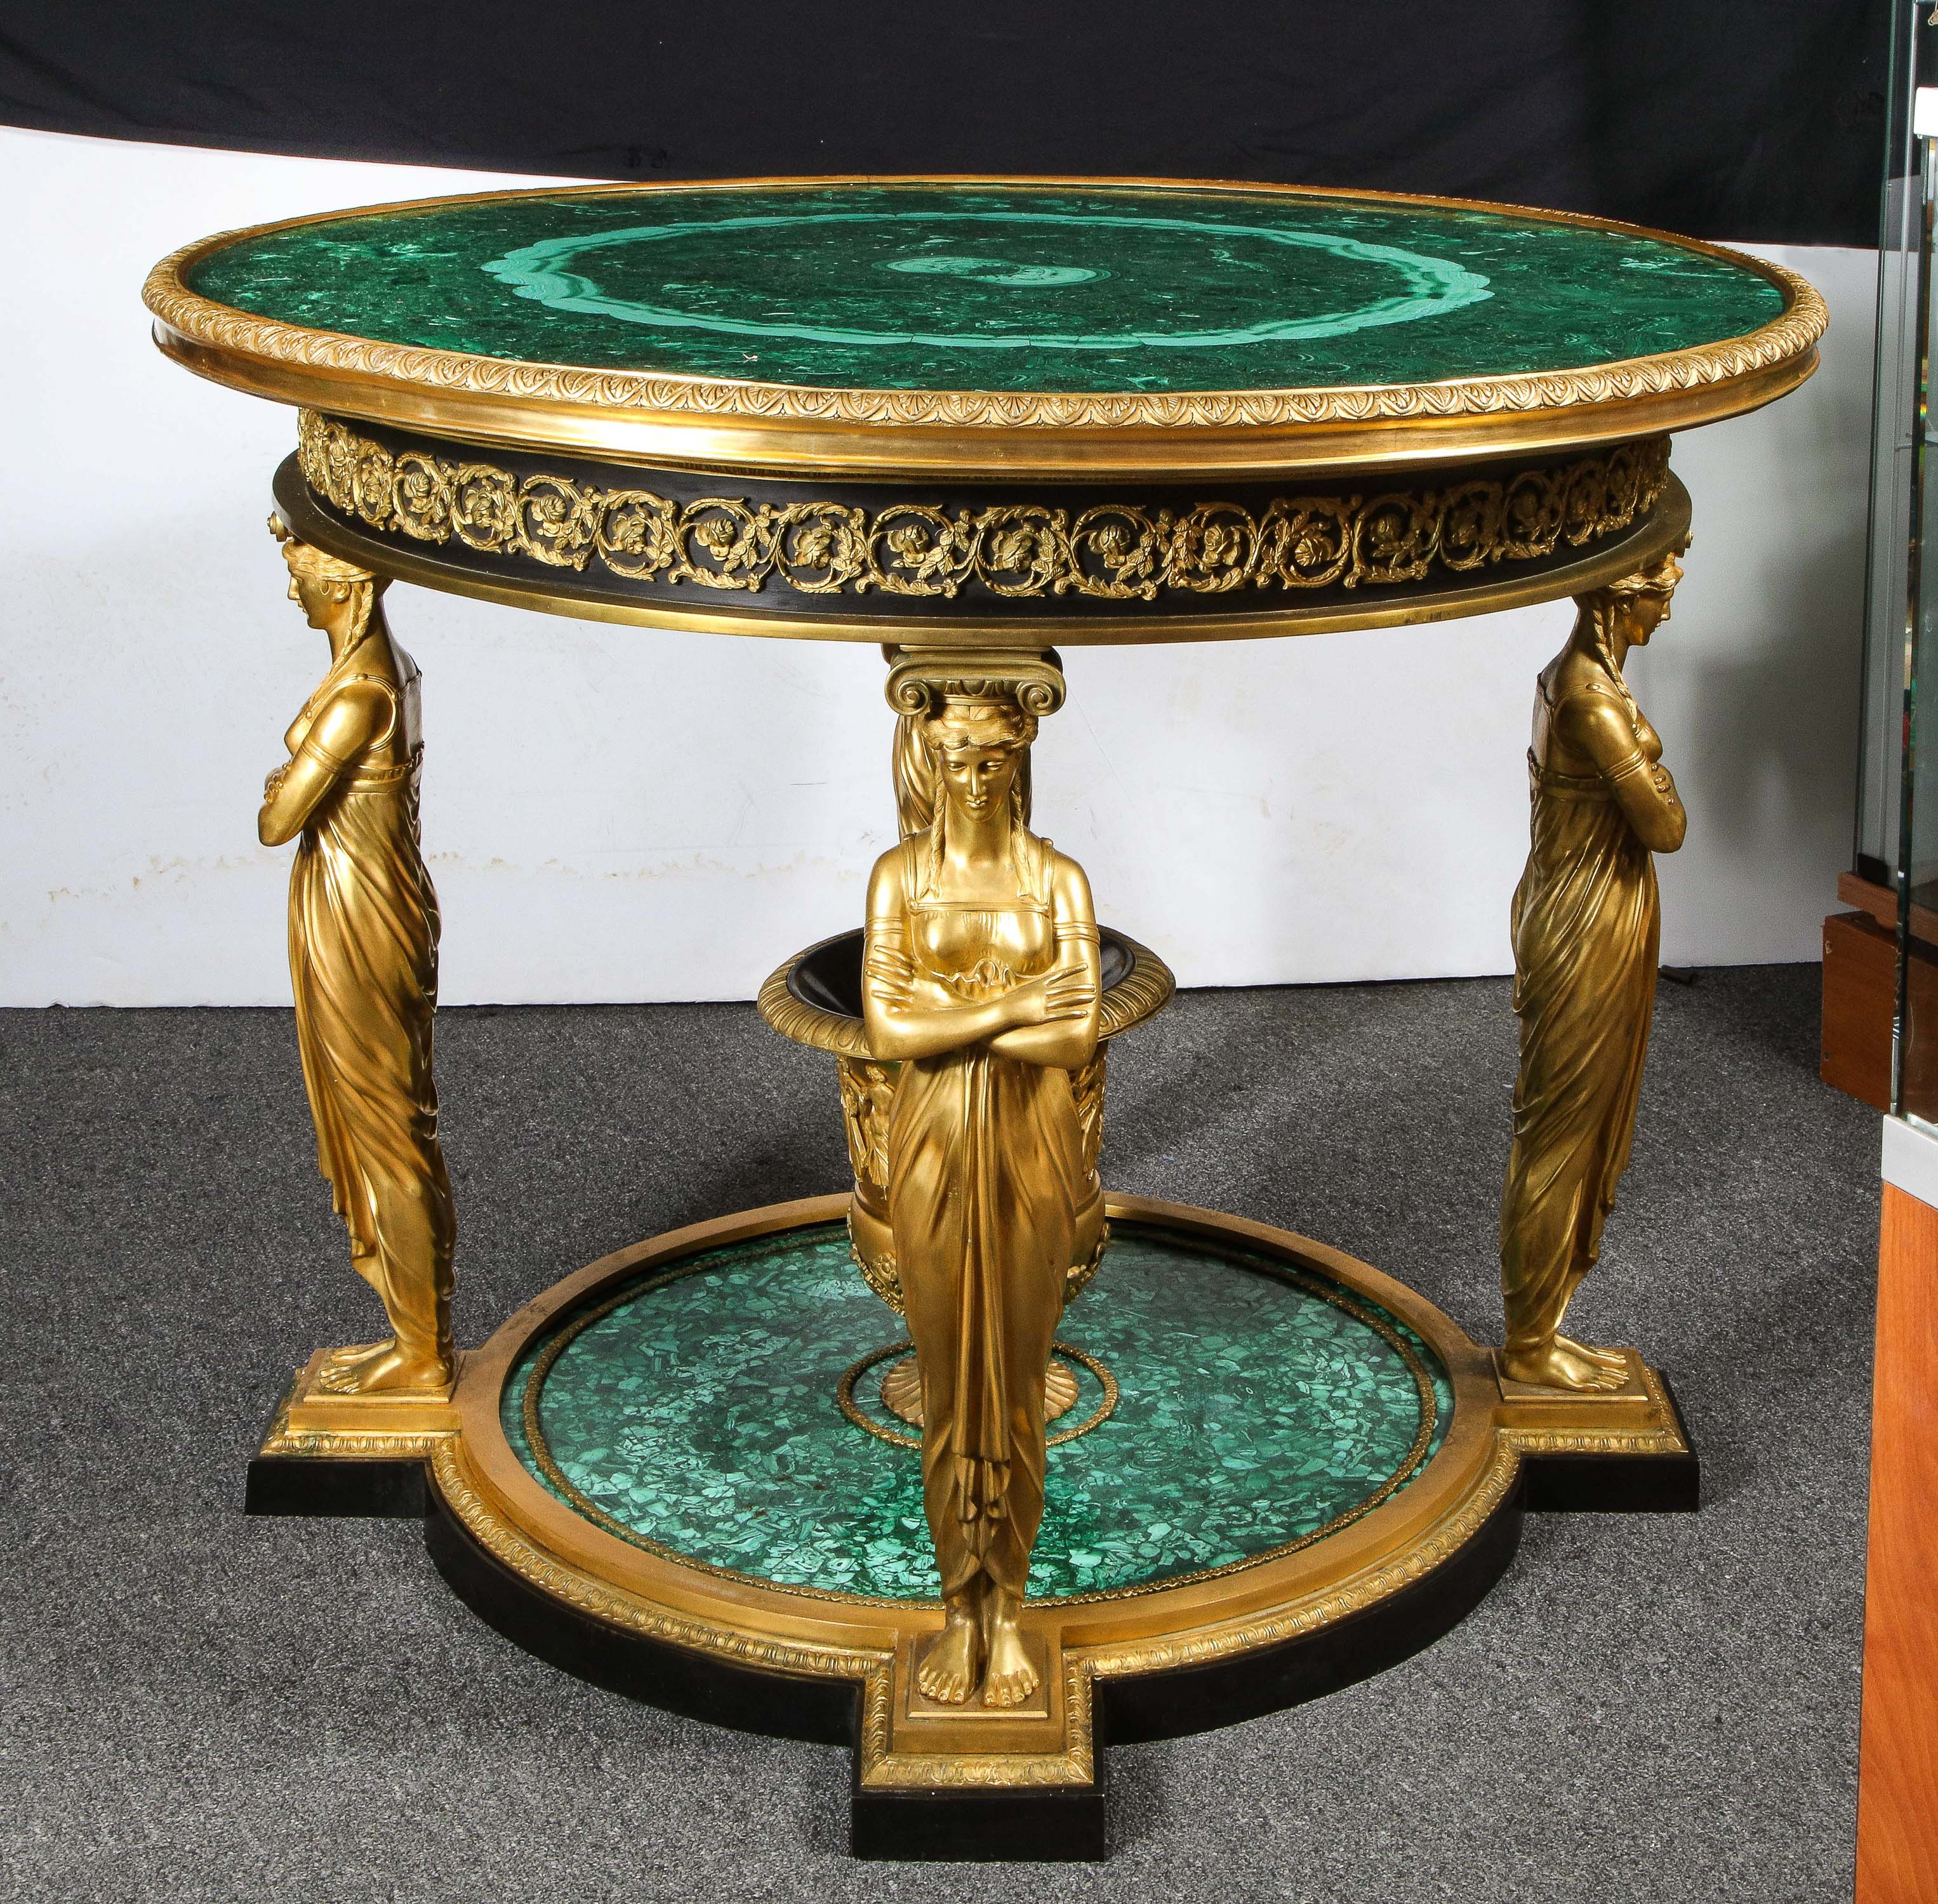 An impressive empire style malachite and ormolu center table after the imperial model by Francois Honore Georges Jacob-Desmalter, 1770-1841.

